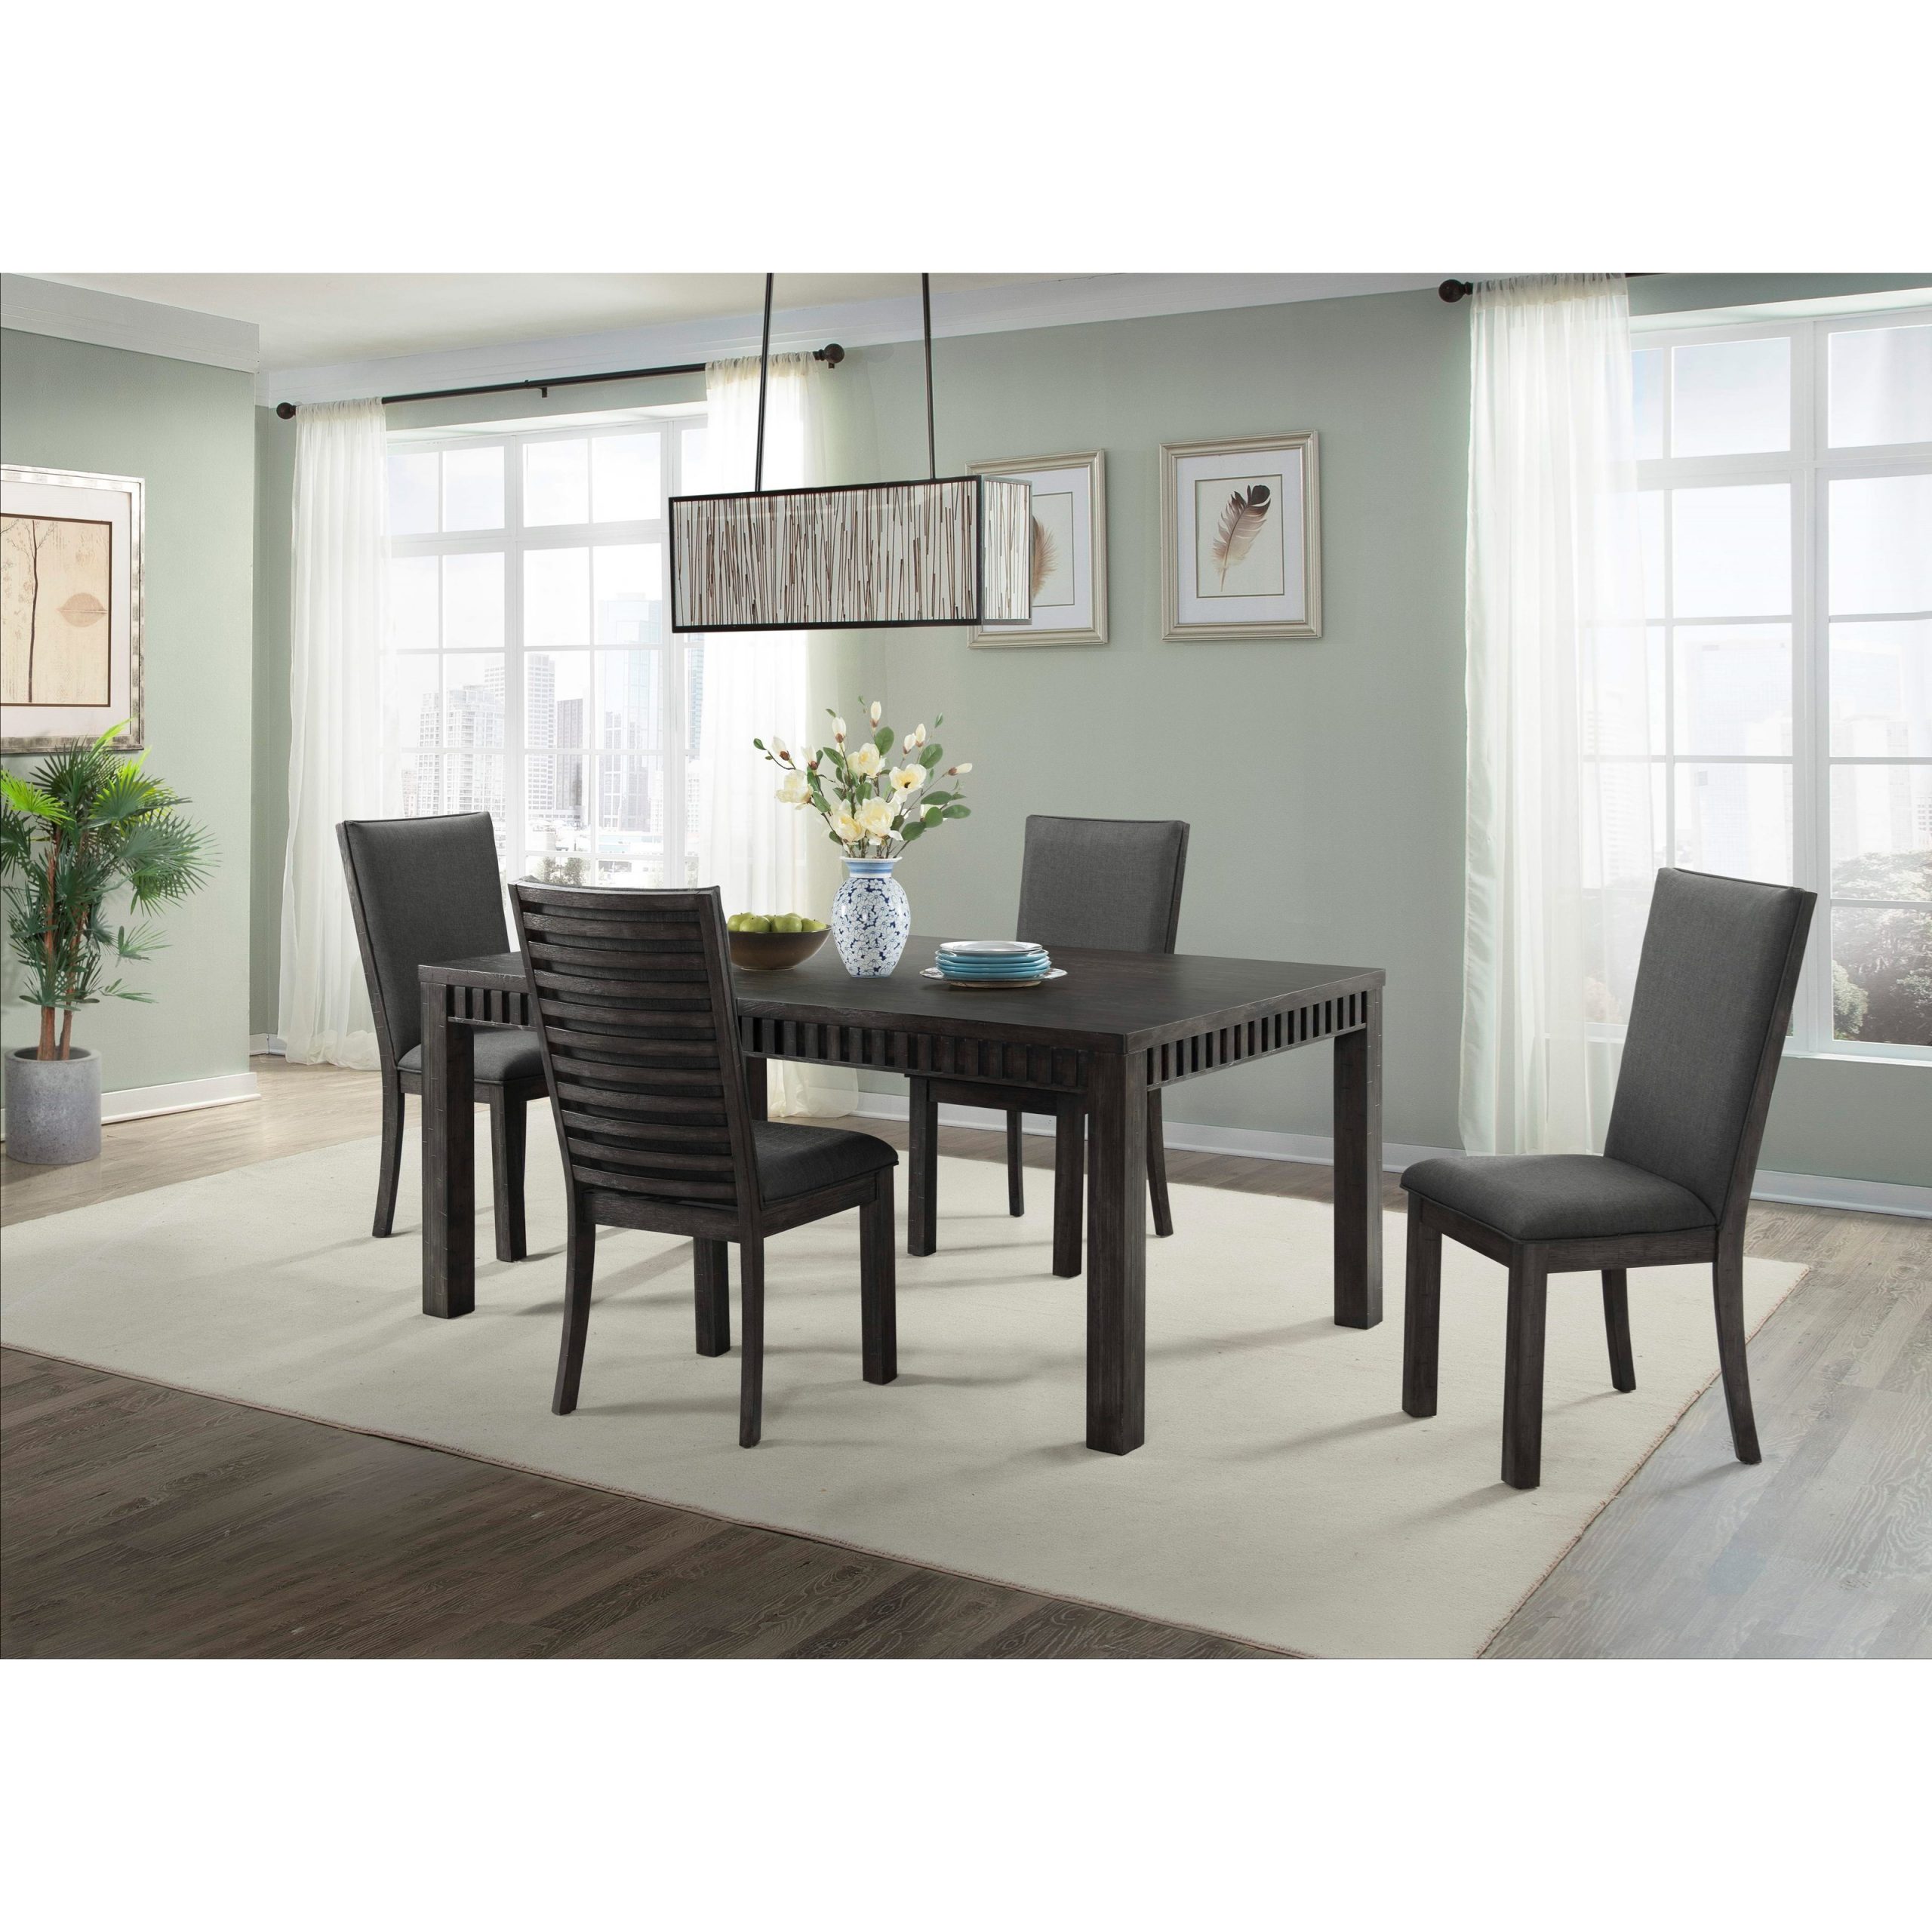 Elements International Shelter Bay Transitional 5 Piece pertaining to size 3200 X 3200